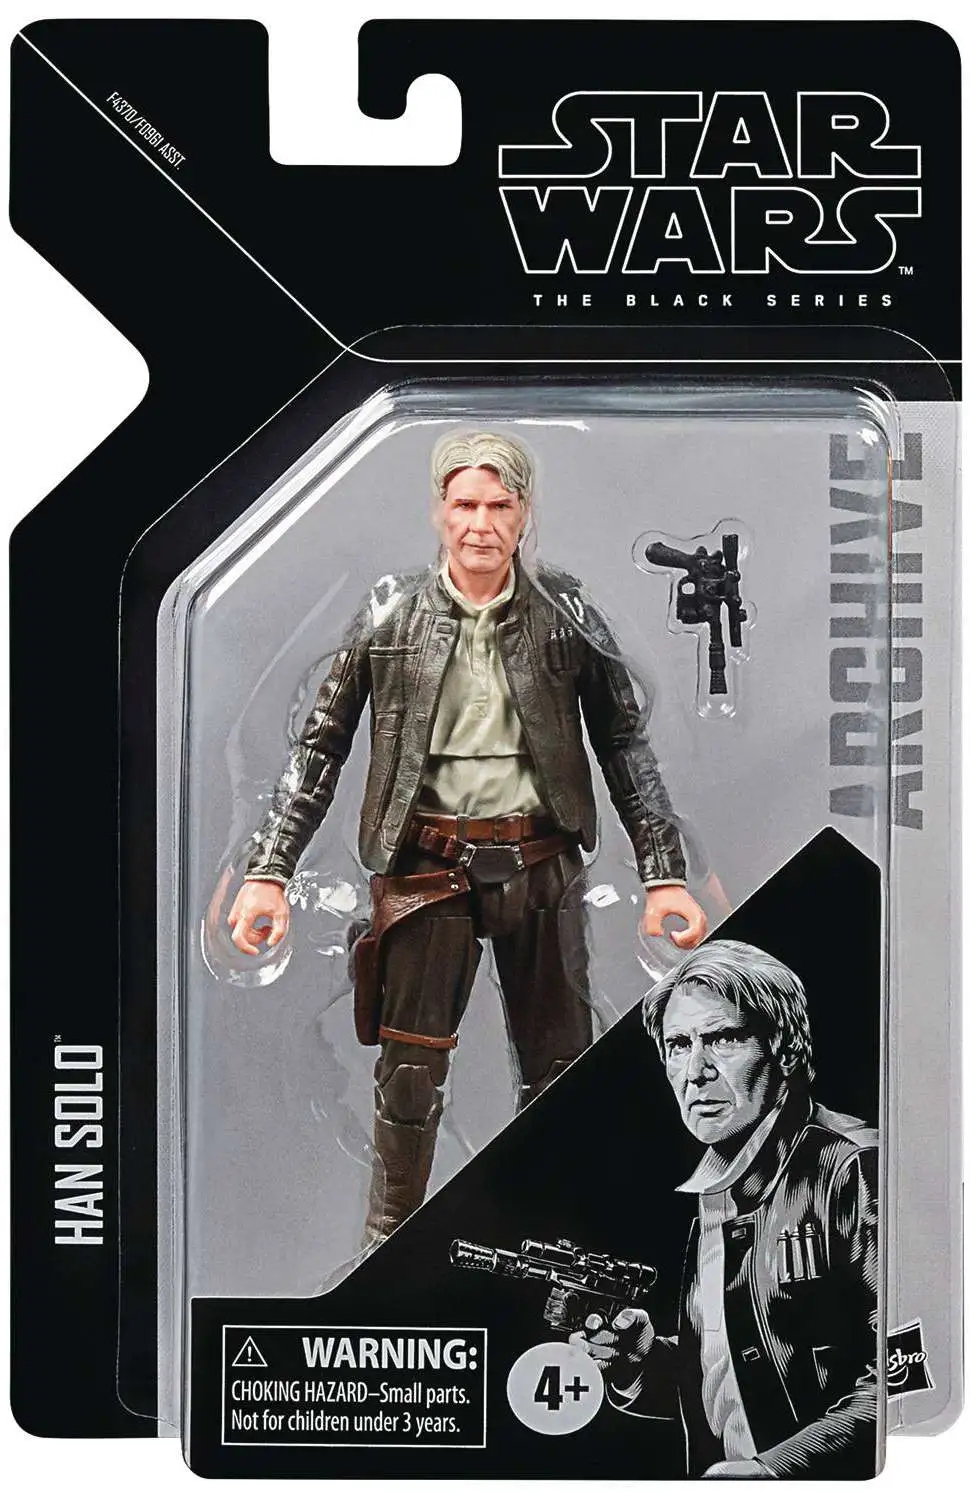 Star Wars Action Figure Black Series Han Solo Force Awakens 3.75  Exclusive New 